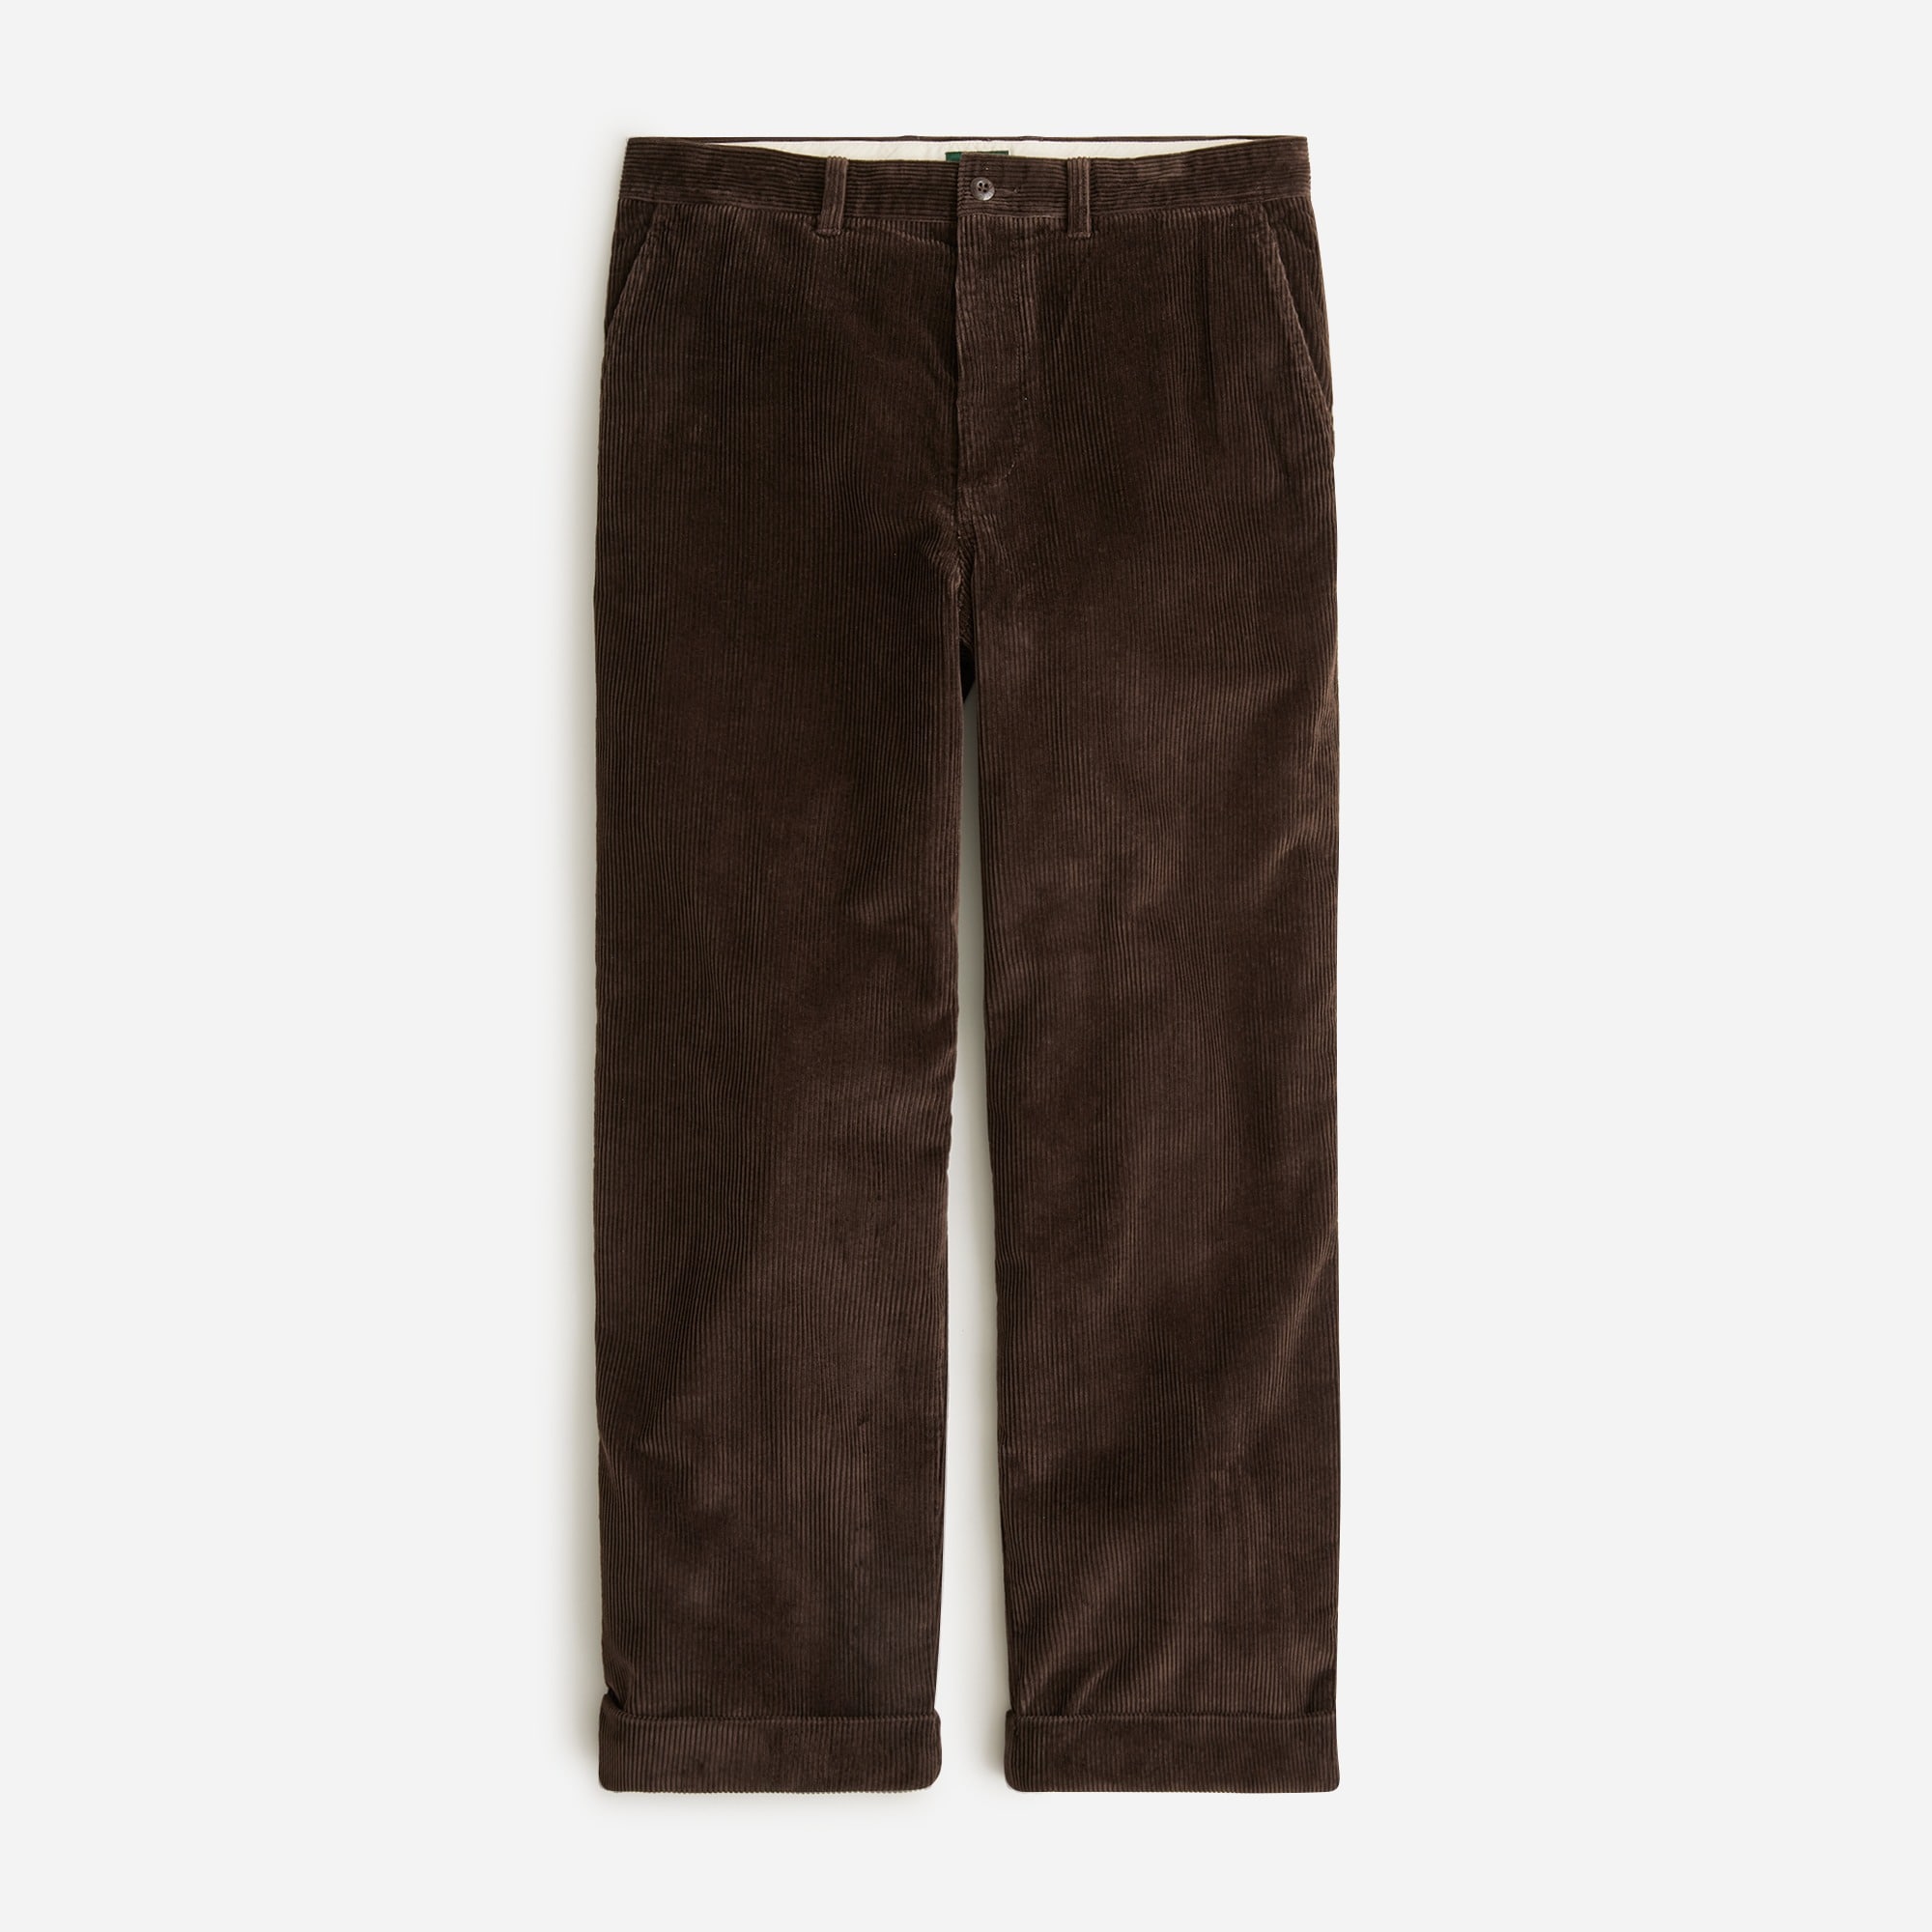 mens Limited-edition Giant-fit corduroy pant